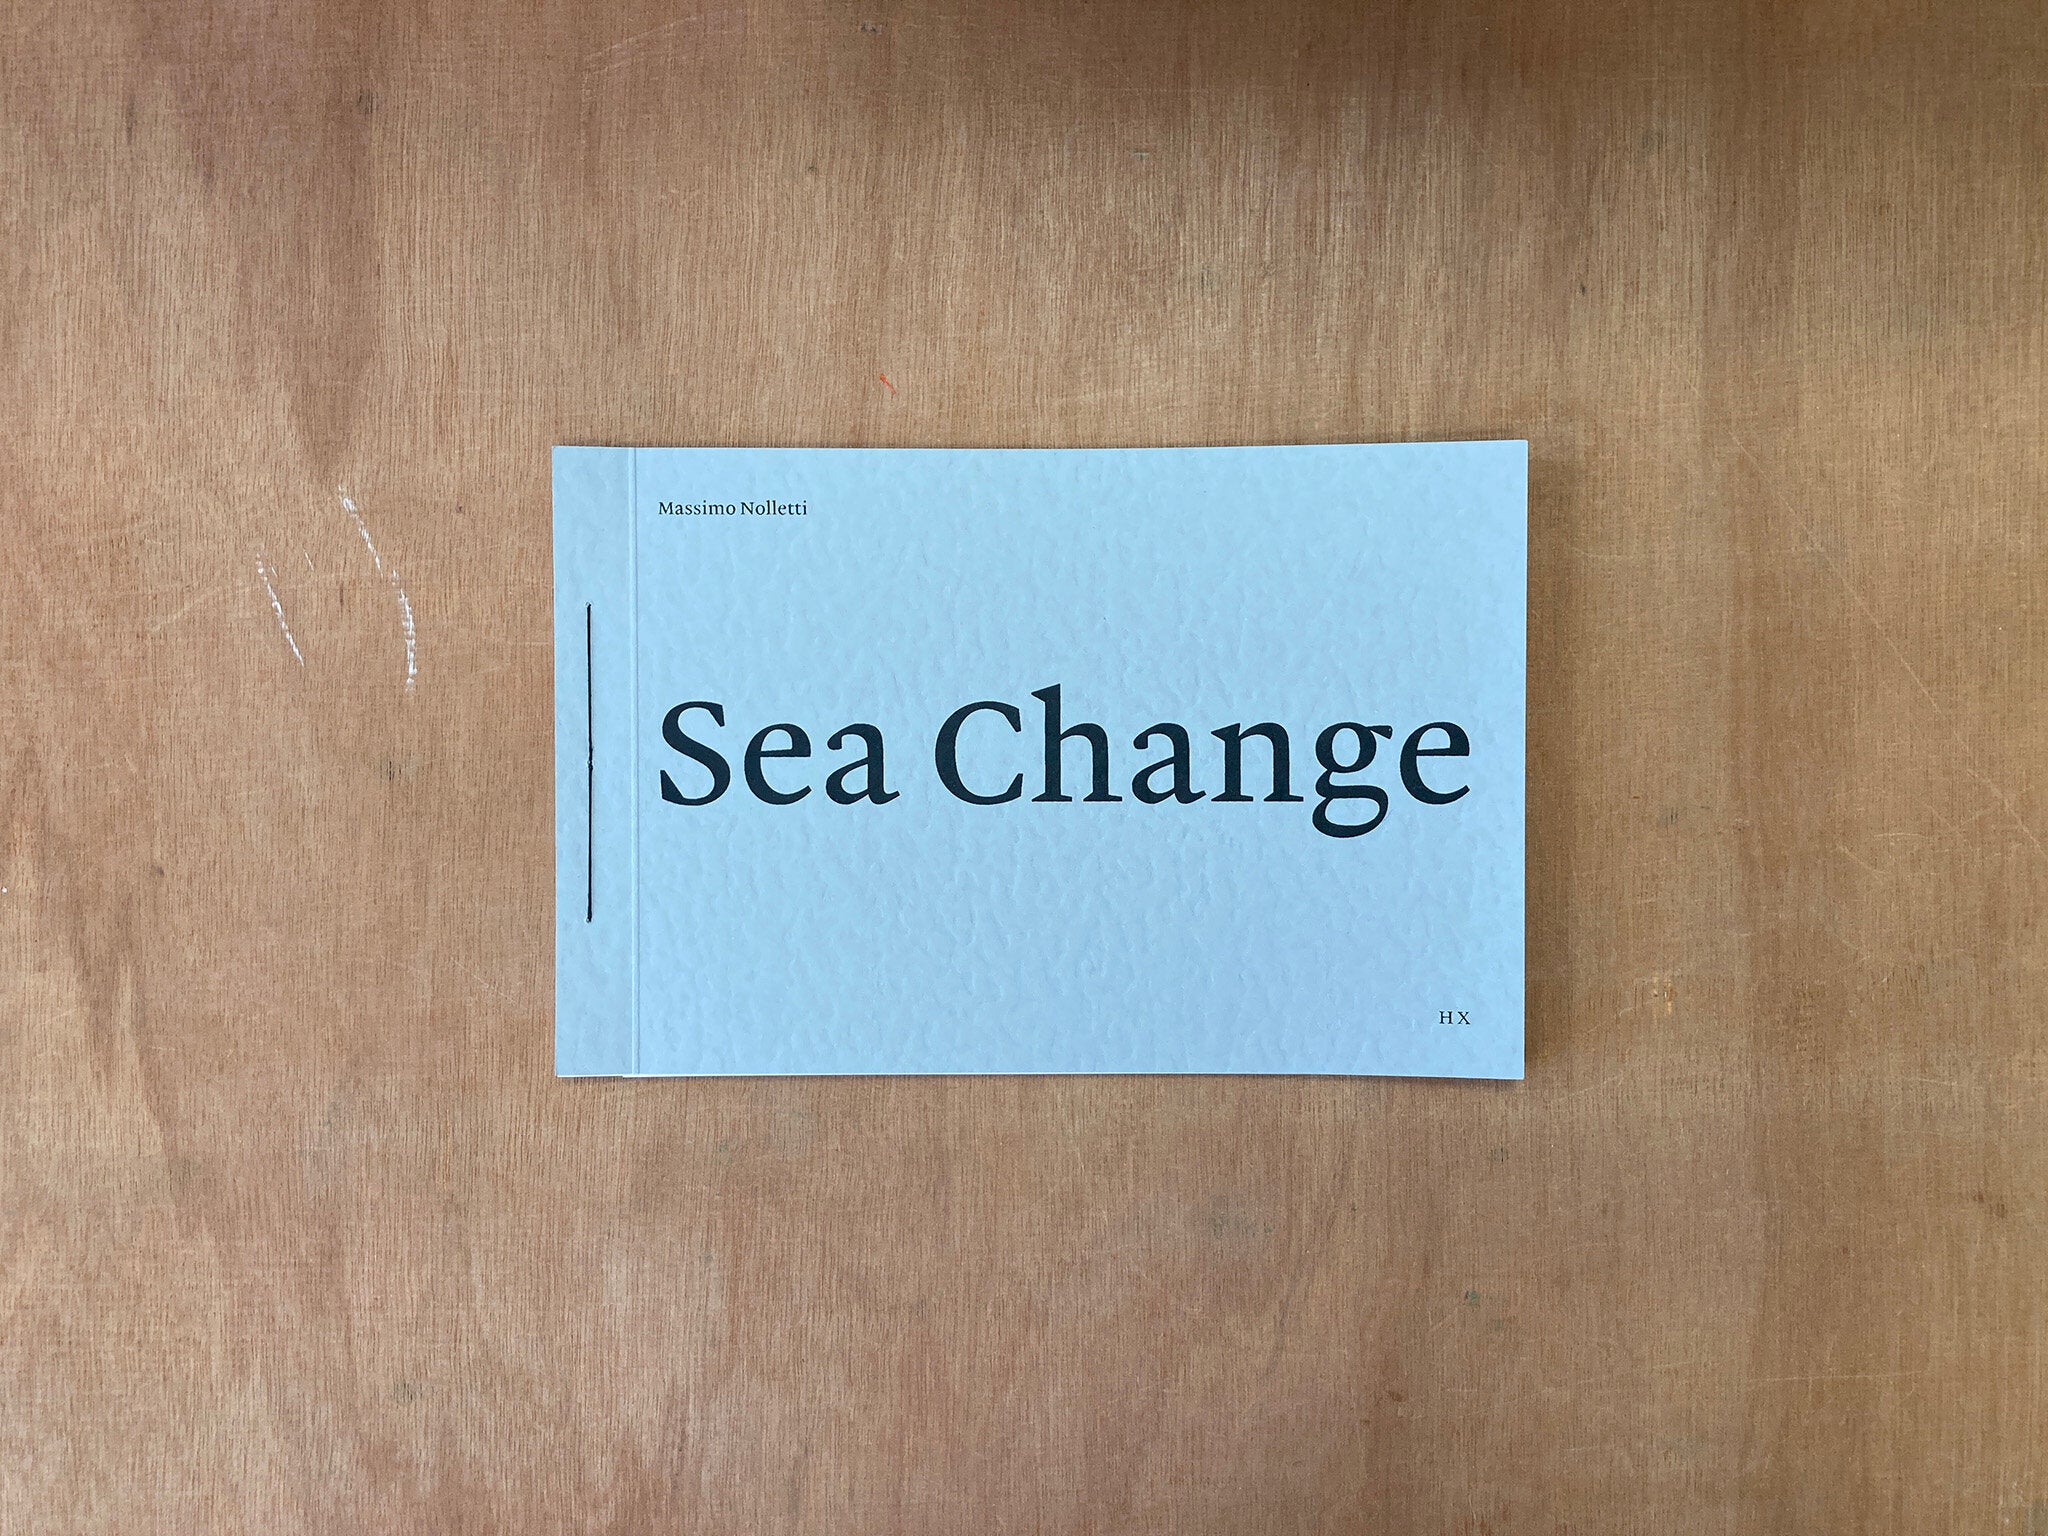 SEA CHANGE by Massimo Nolletti and H X